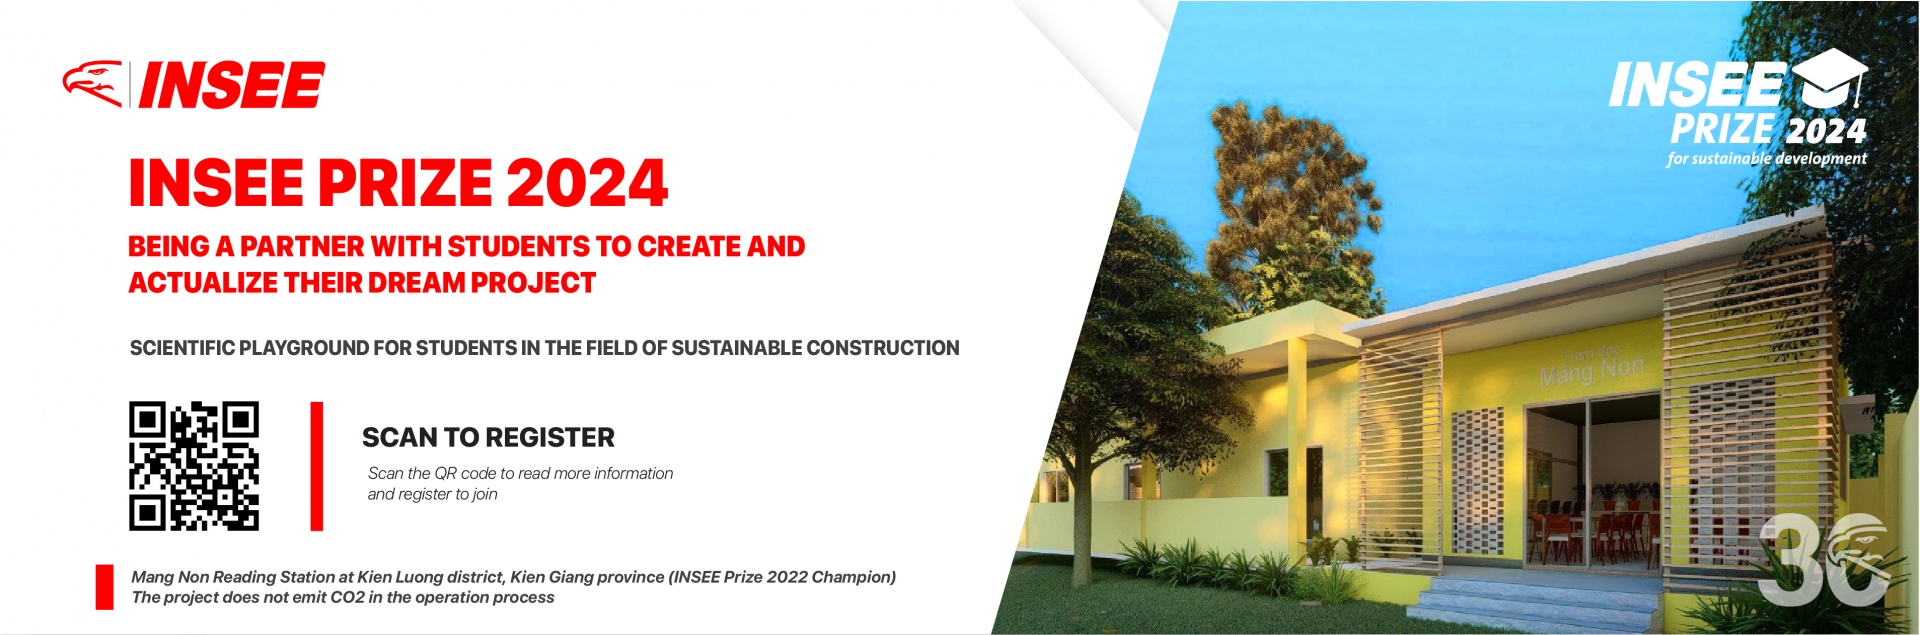 INSEE Prize 2024 building sustainable dream for community